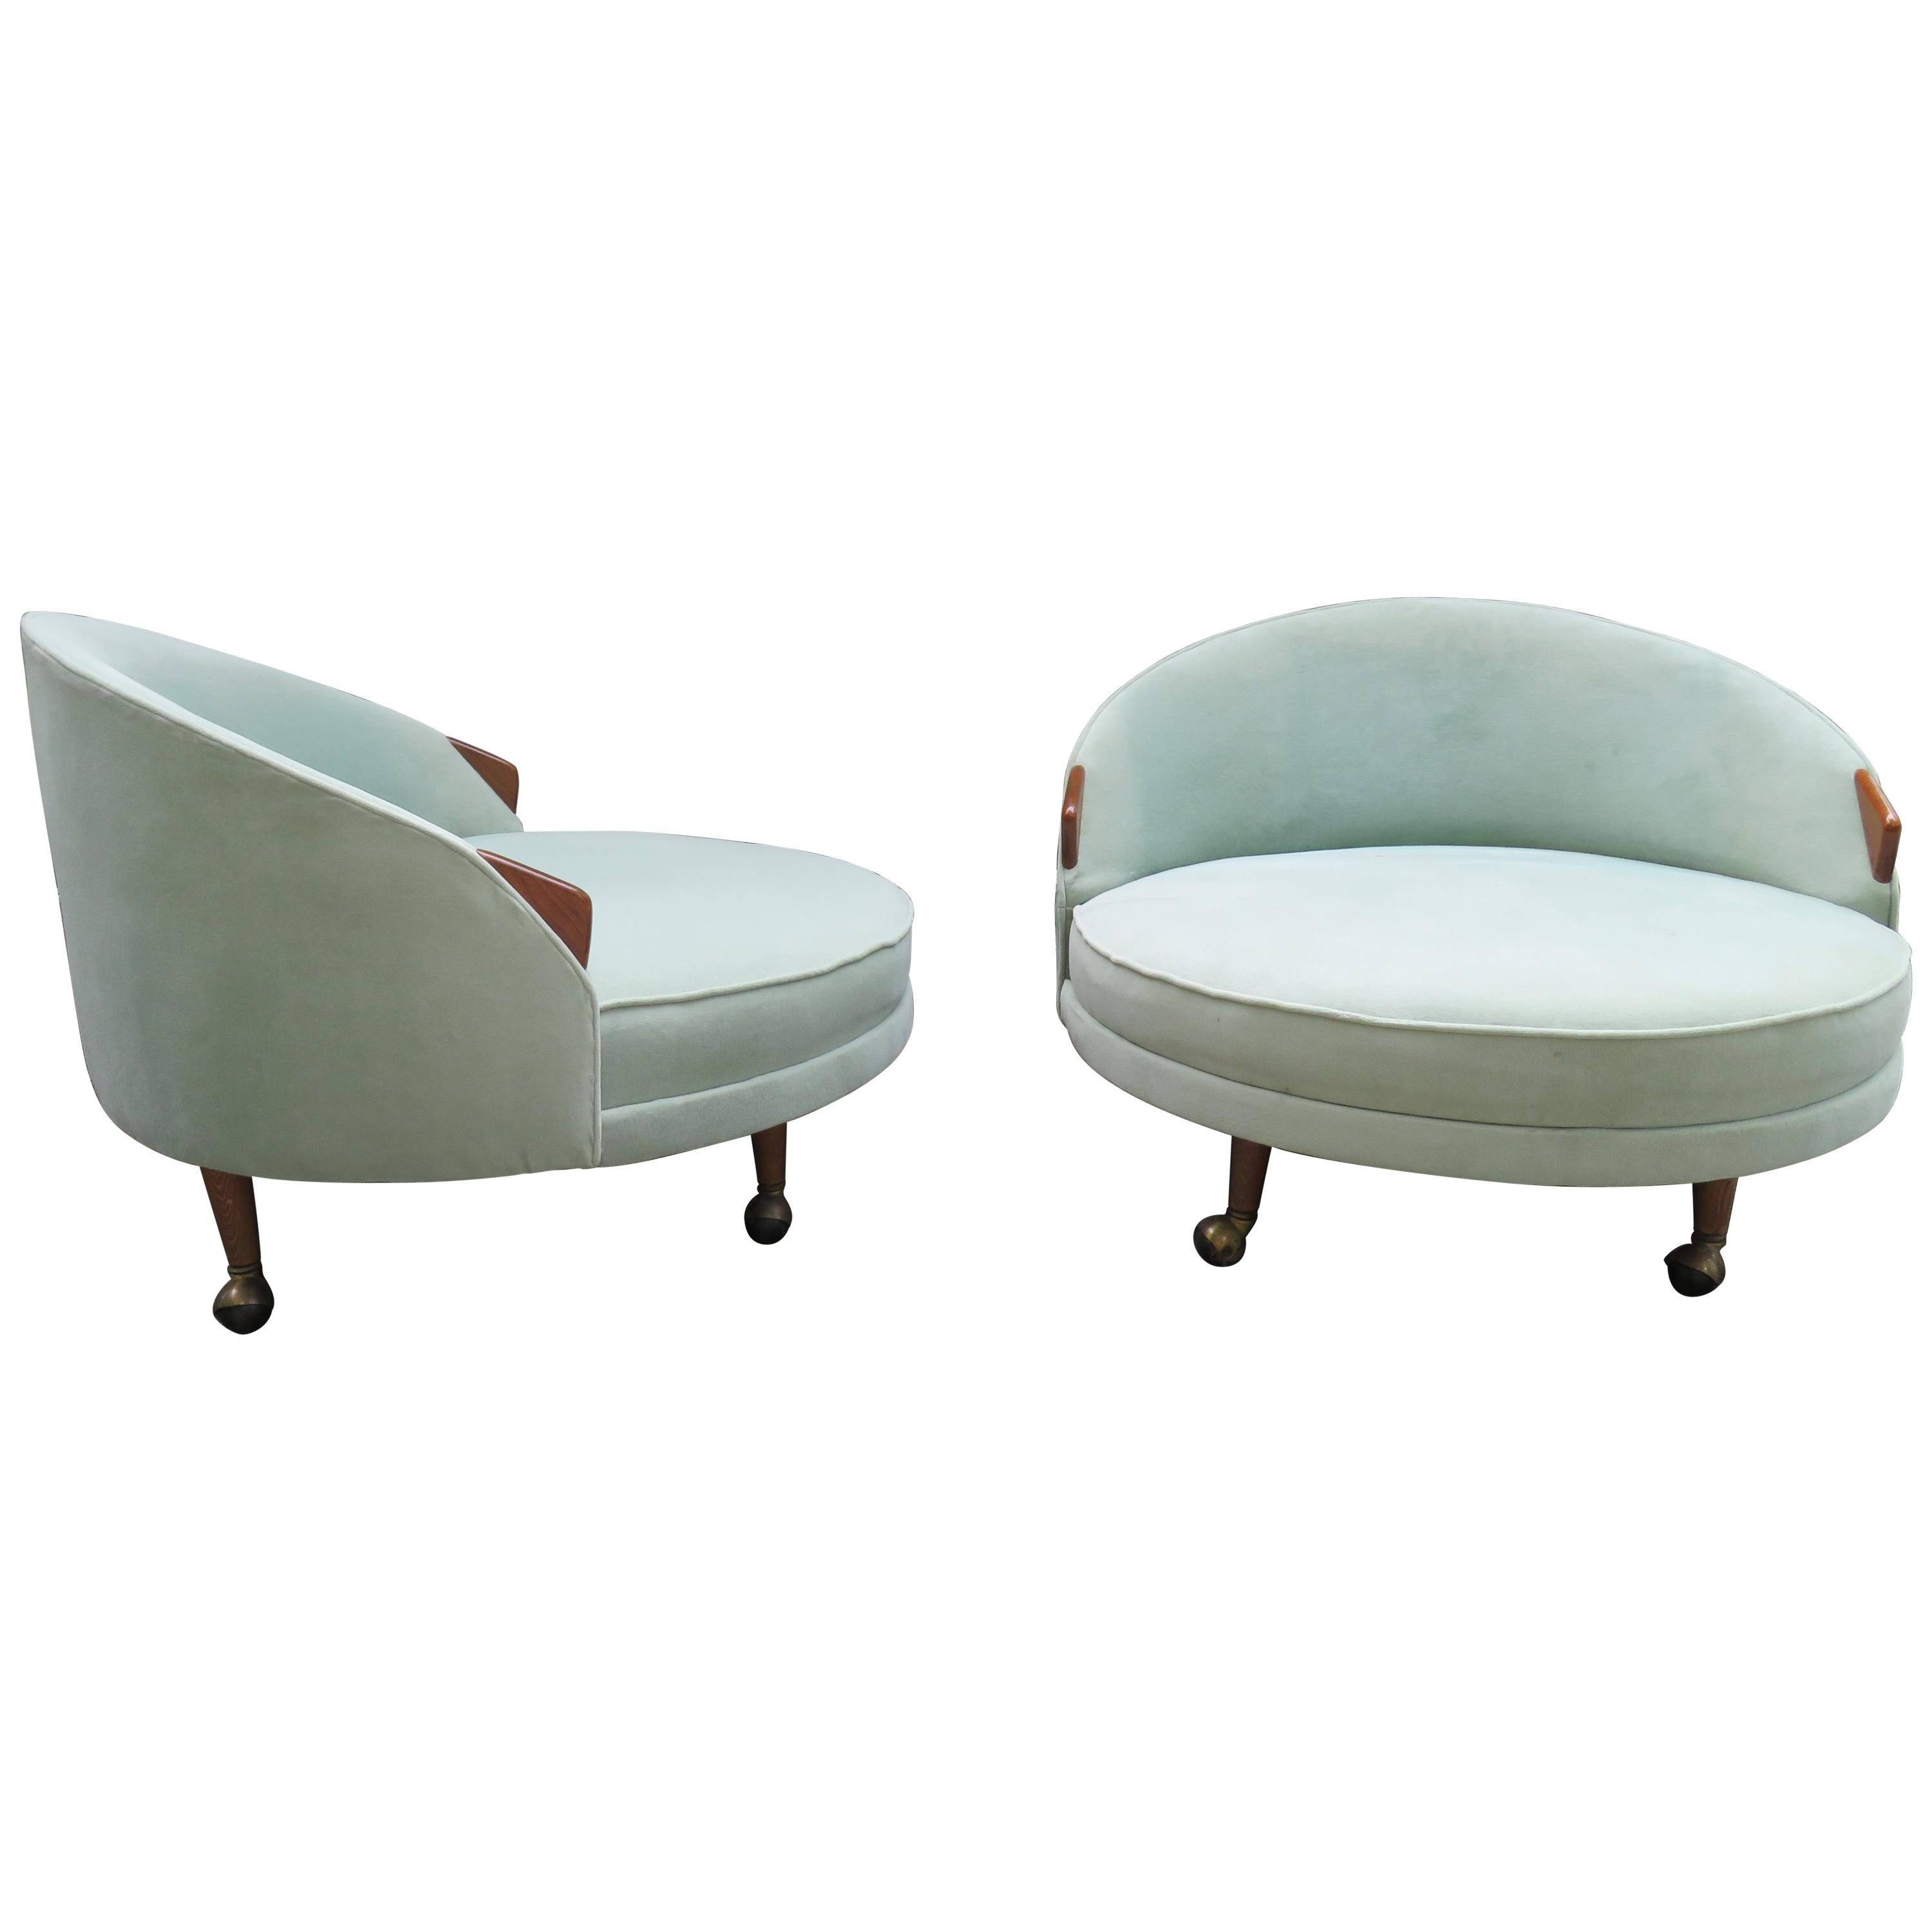 Lovely Pair of Adrian Pearsall Havana Circle Lounge Chairs Mid-Century Modern